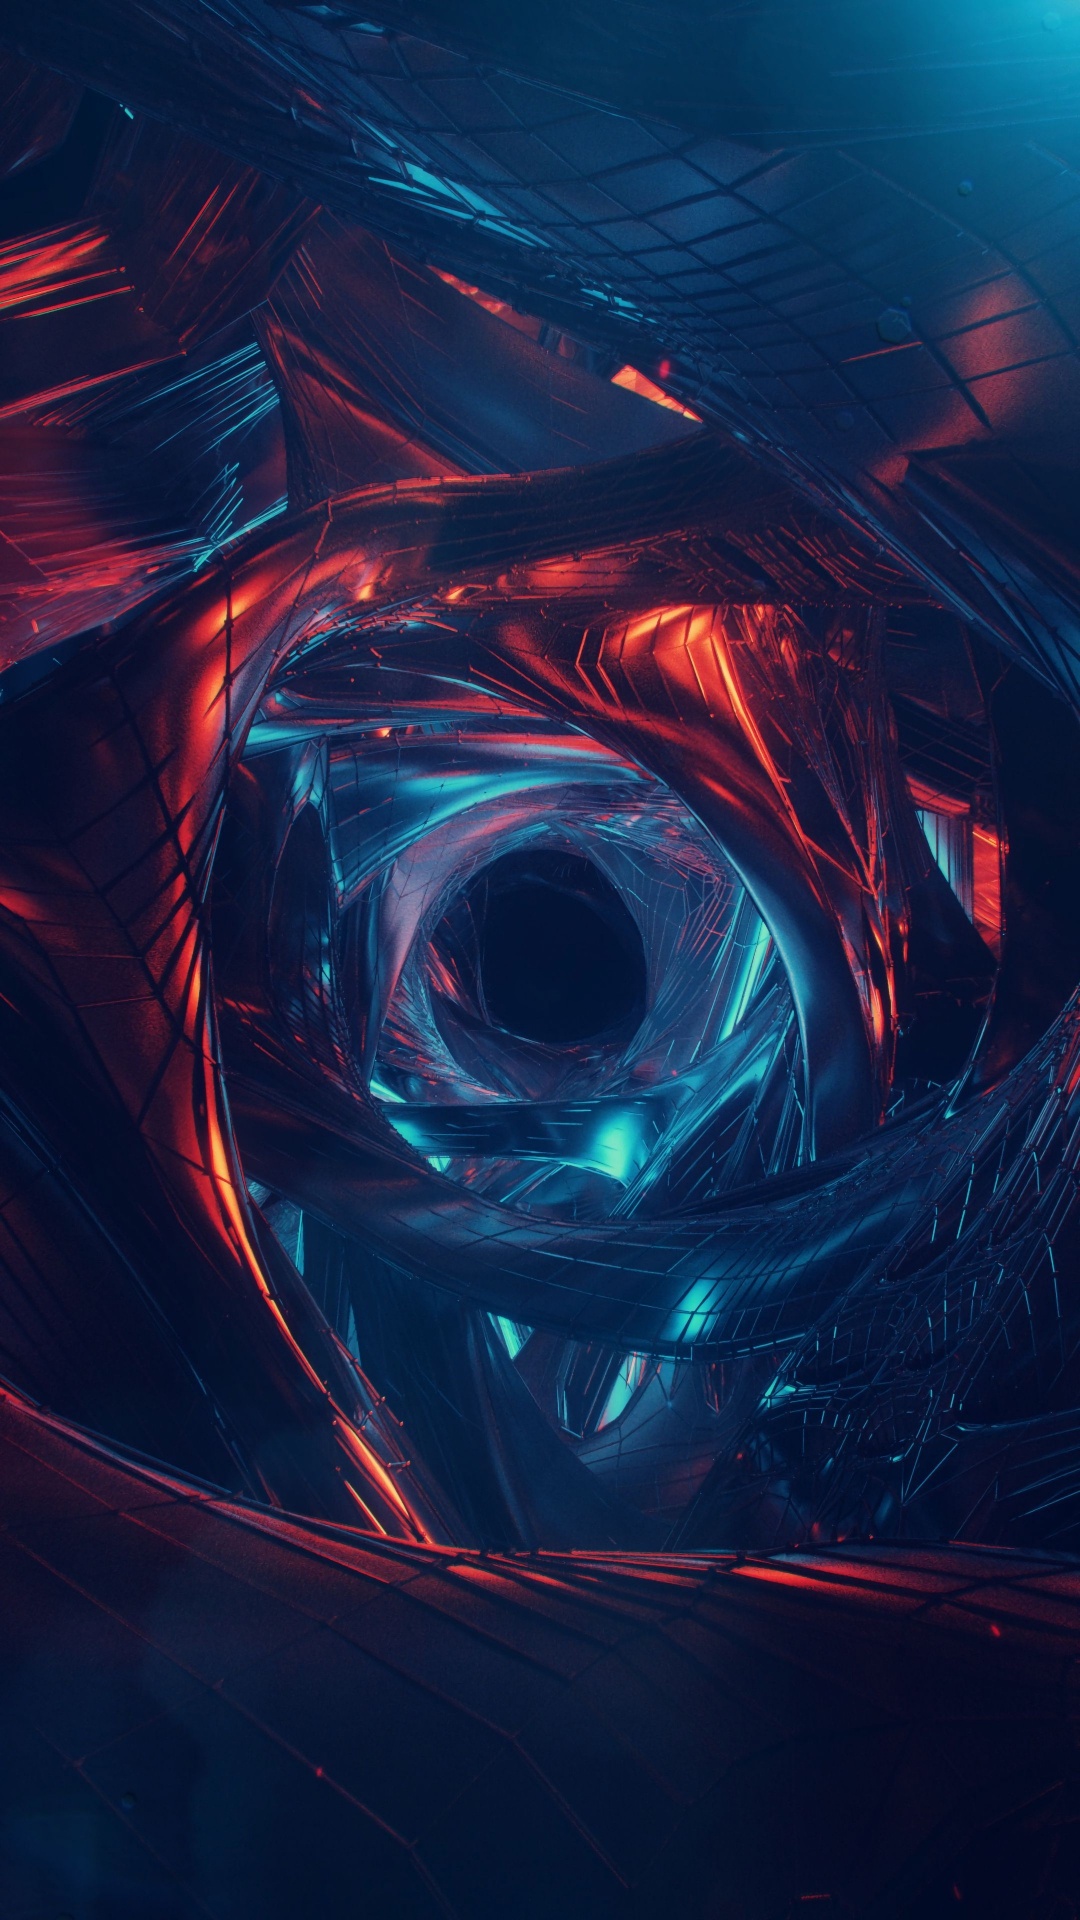 Android, Red, Colorfulness, Electric Blue, Fractal Art. Wallpaper in 1080x1920 Resolution